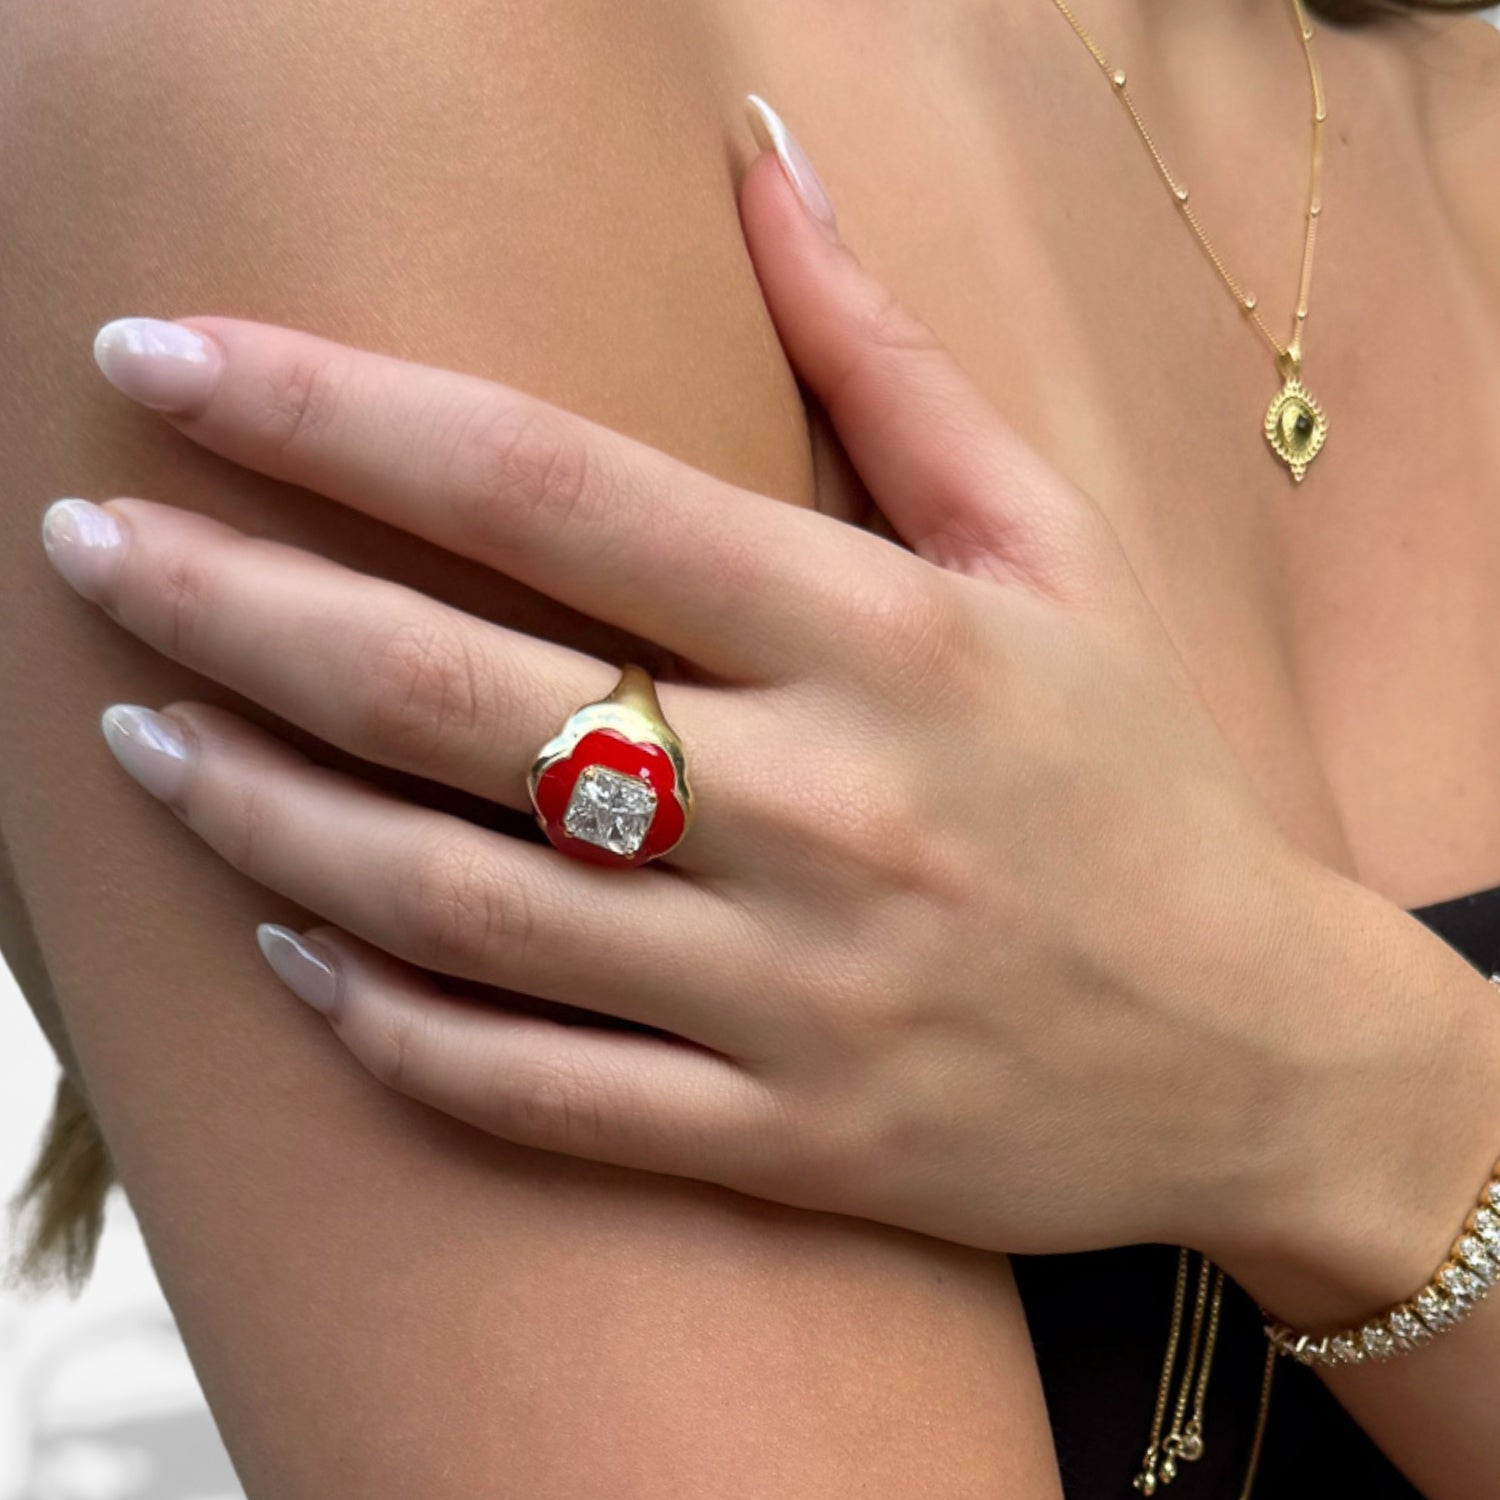 Luck on Your Finger: Model with Clover Red Ring